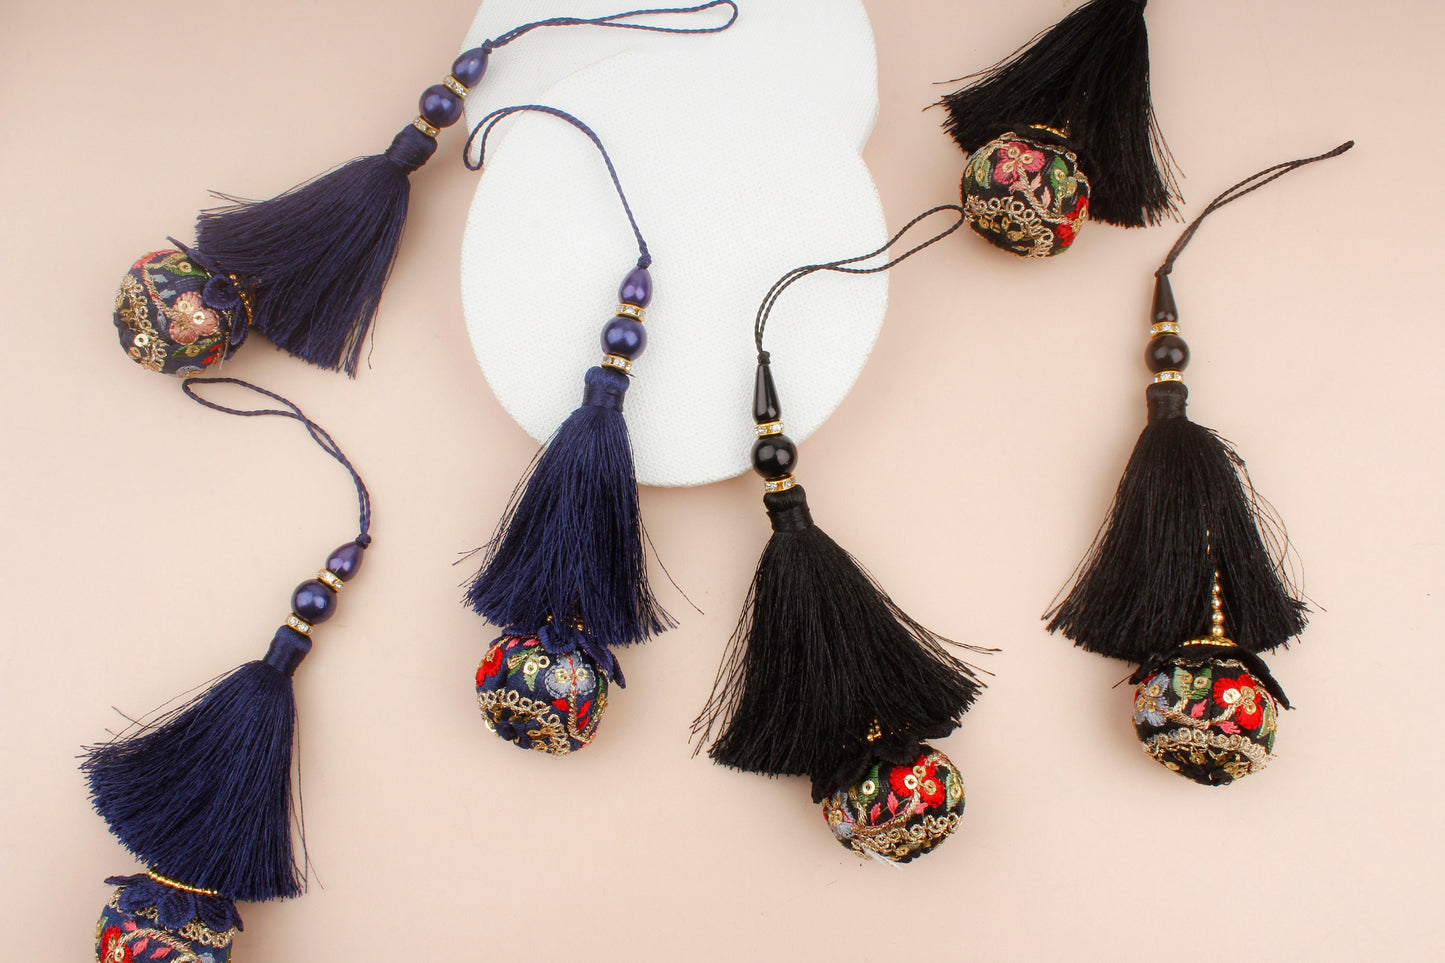 Set of 6 Embroidered Silky Tassels in Blue, Black